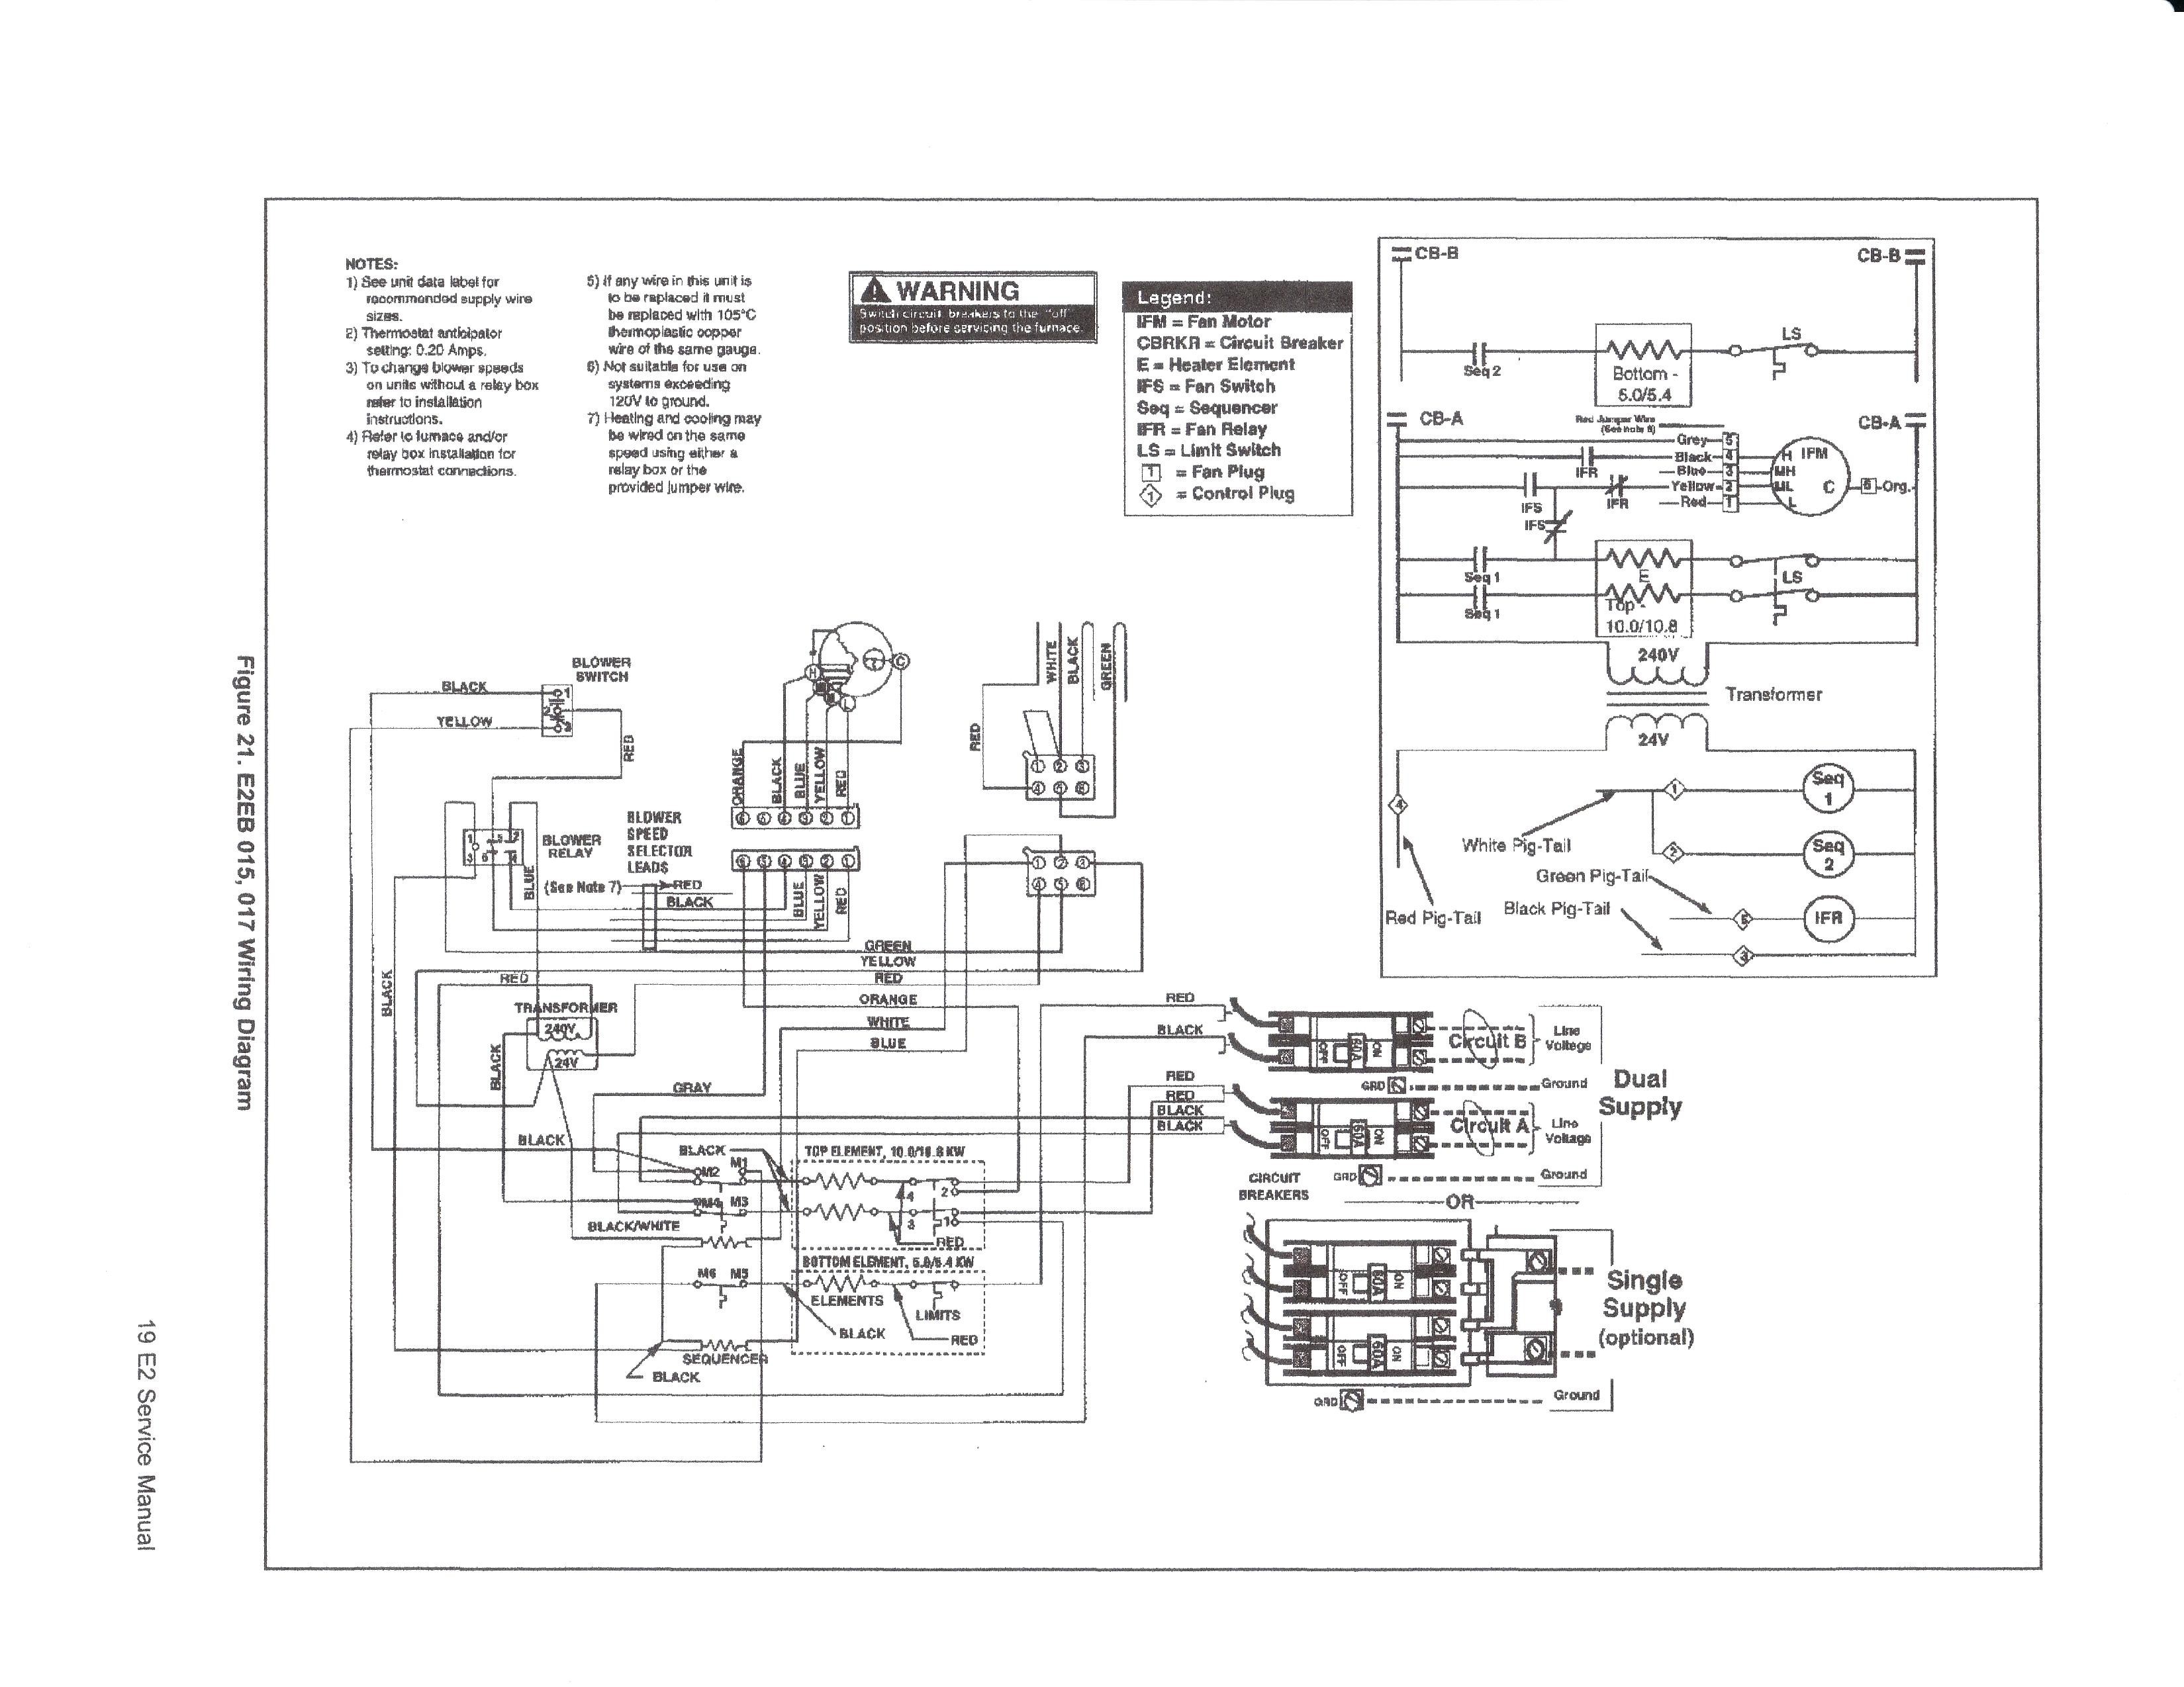 Heat Sequencer Wiring Diagram Elegant Coleman Electric Furnace Schematic Gas Parts Tagged Manual With